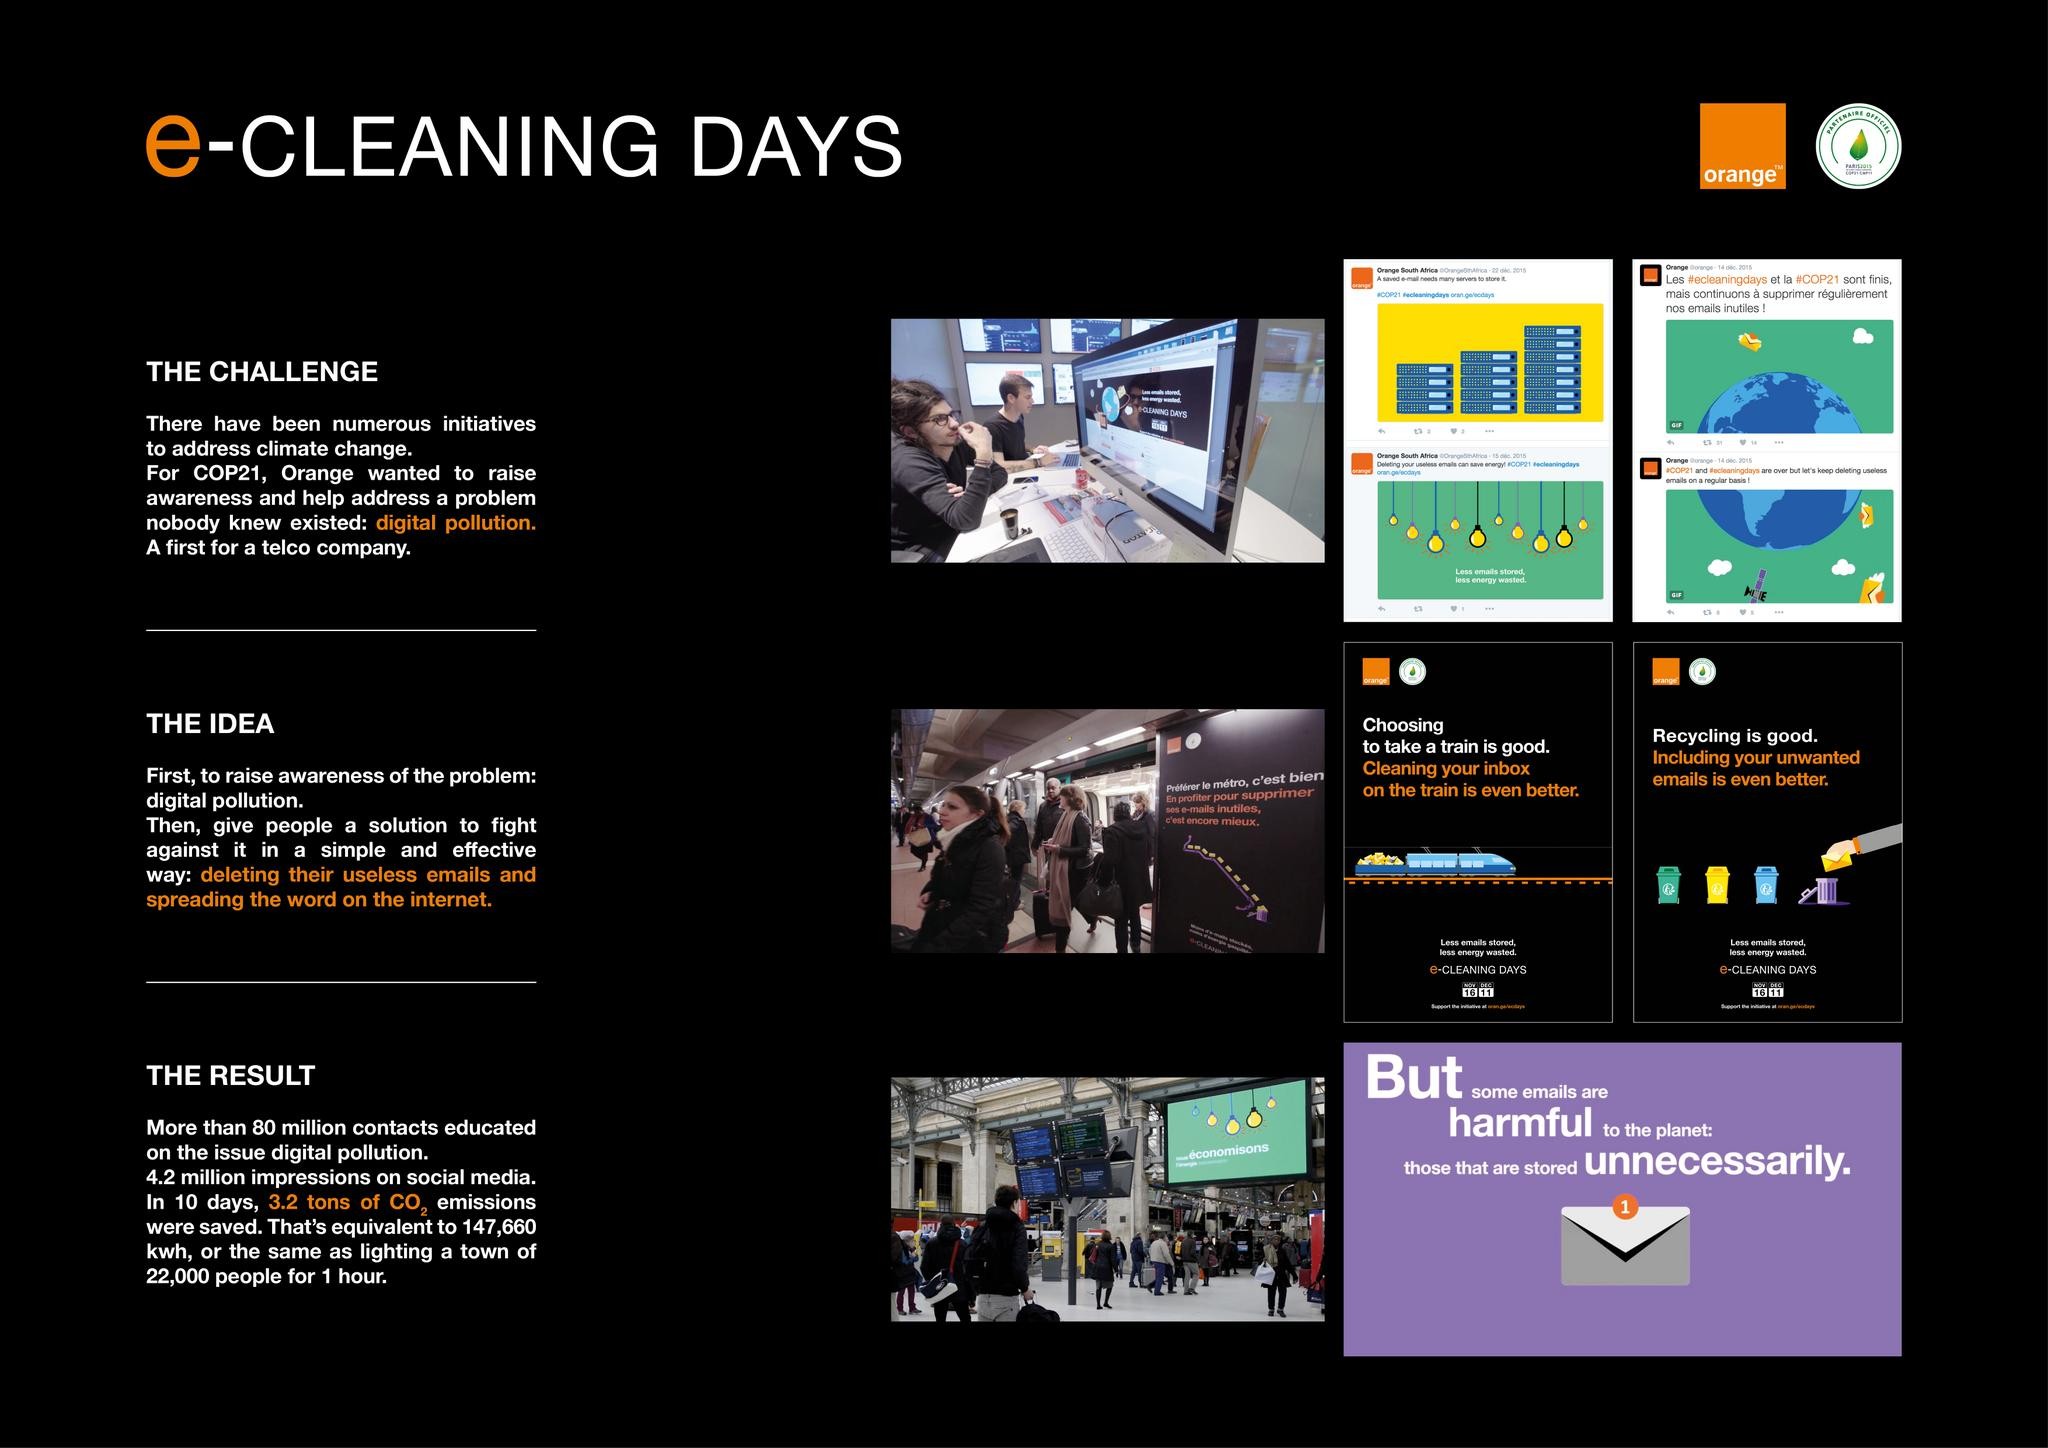 E-cleaning days